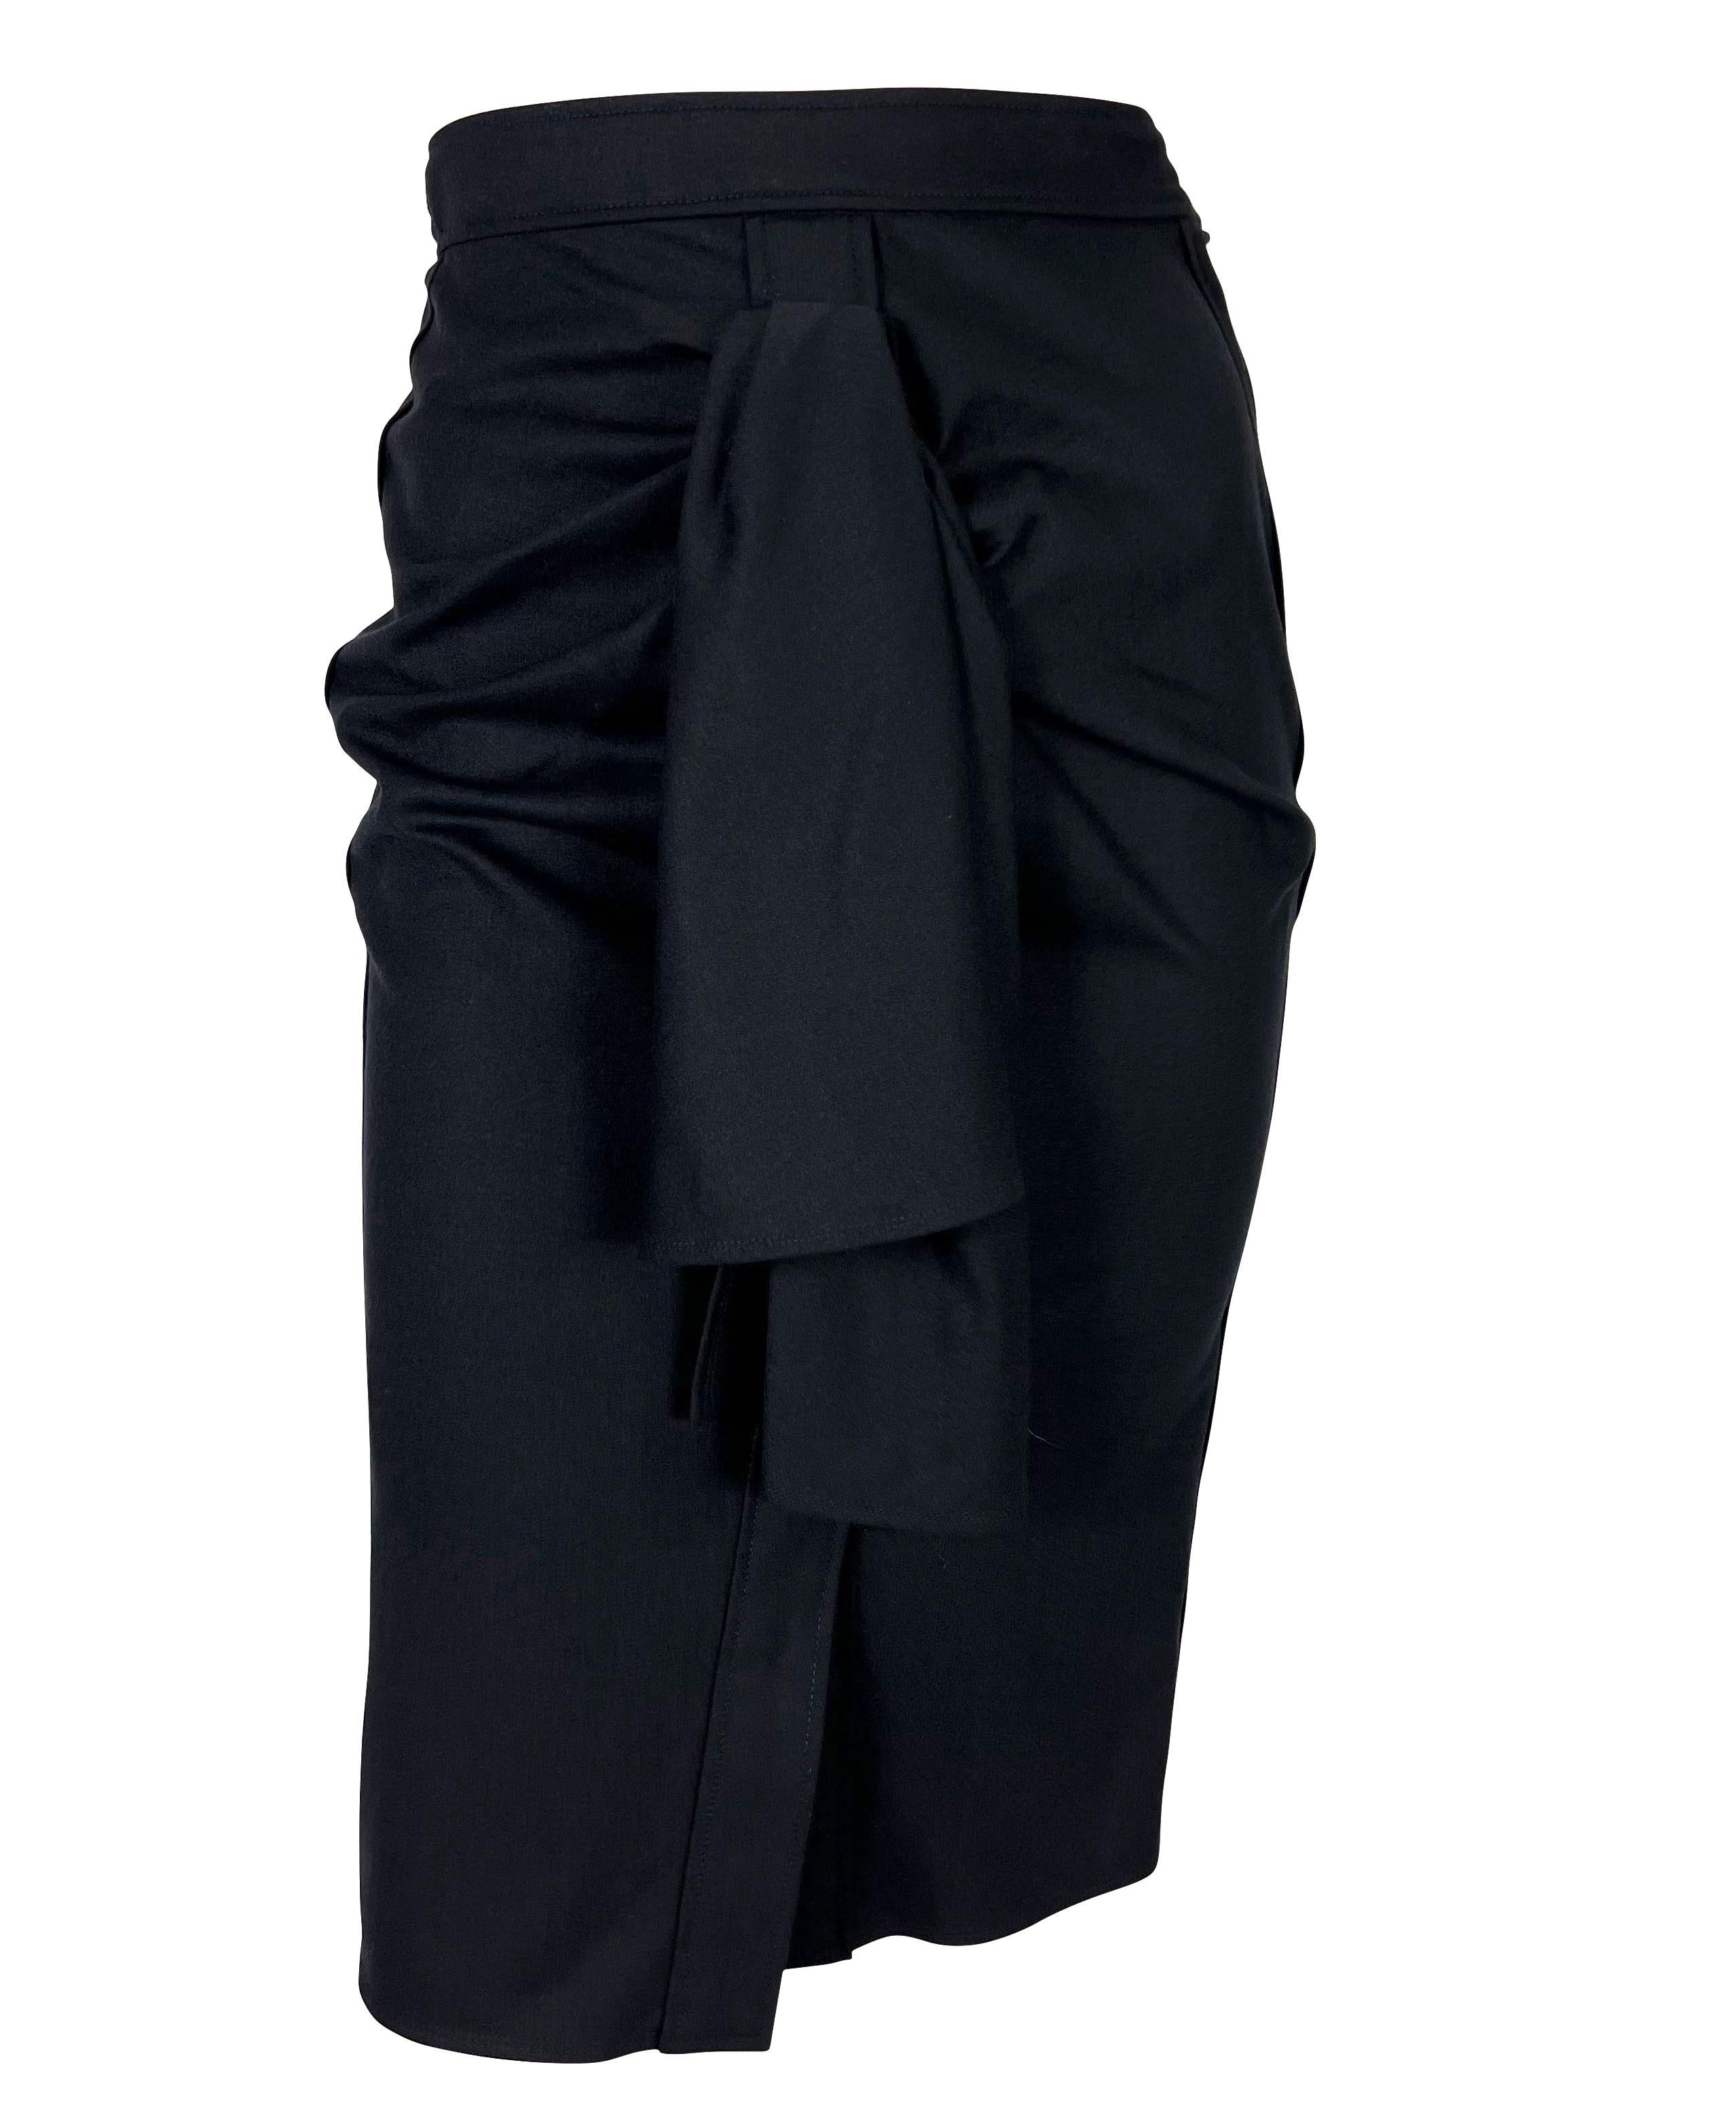 2000s Yves Saint Laurent by Tom Ford Black Faux-Wrap Pencil Stretch Wool Skirt  For Sale 2